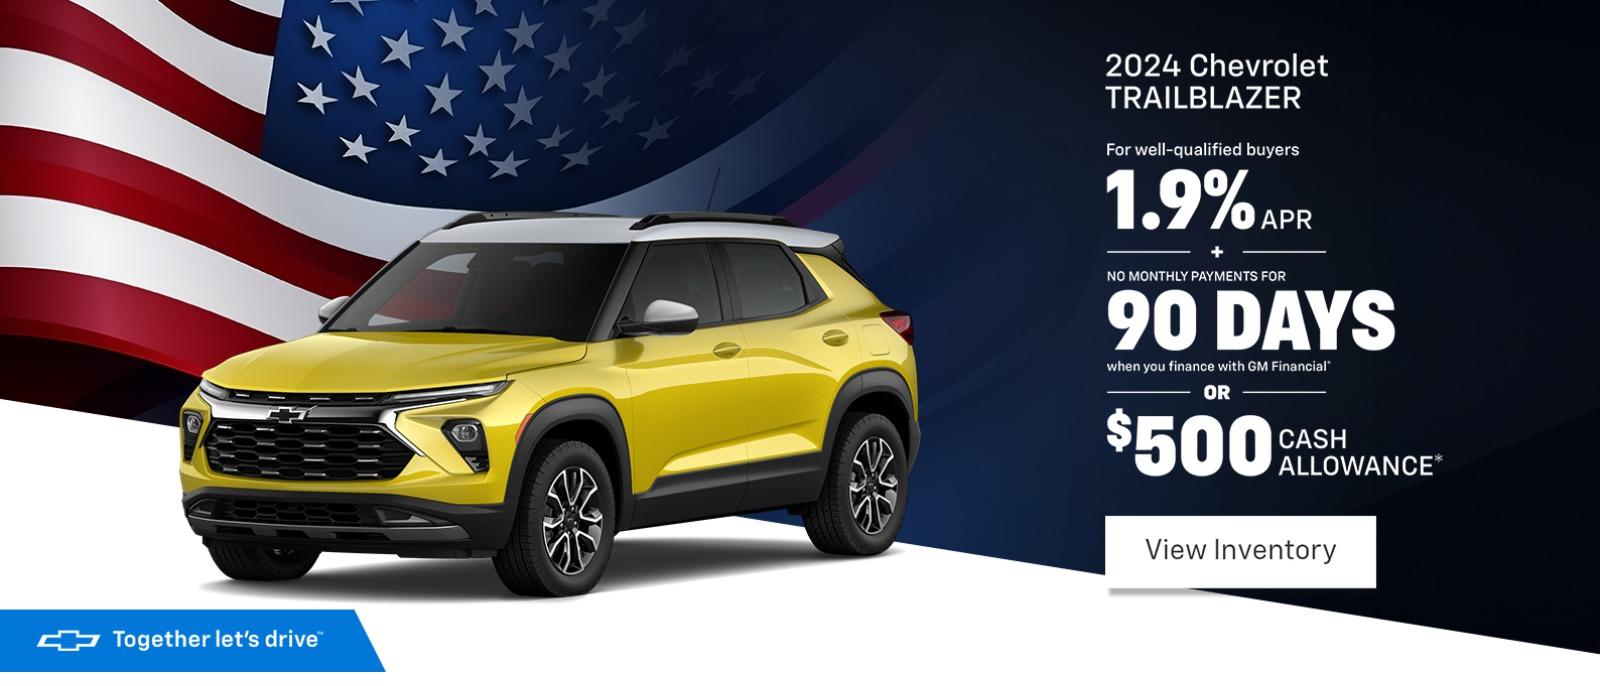 2024 Chevrolet TRAILBLAZER For well-qualified buyers 1.9% APR NO MONTHLY PAYMENTS FOR 90 DAYS when you finance with GM Financial OR $500 CASH ALLOWANCE*